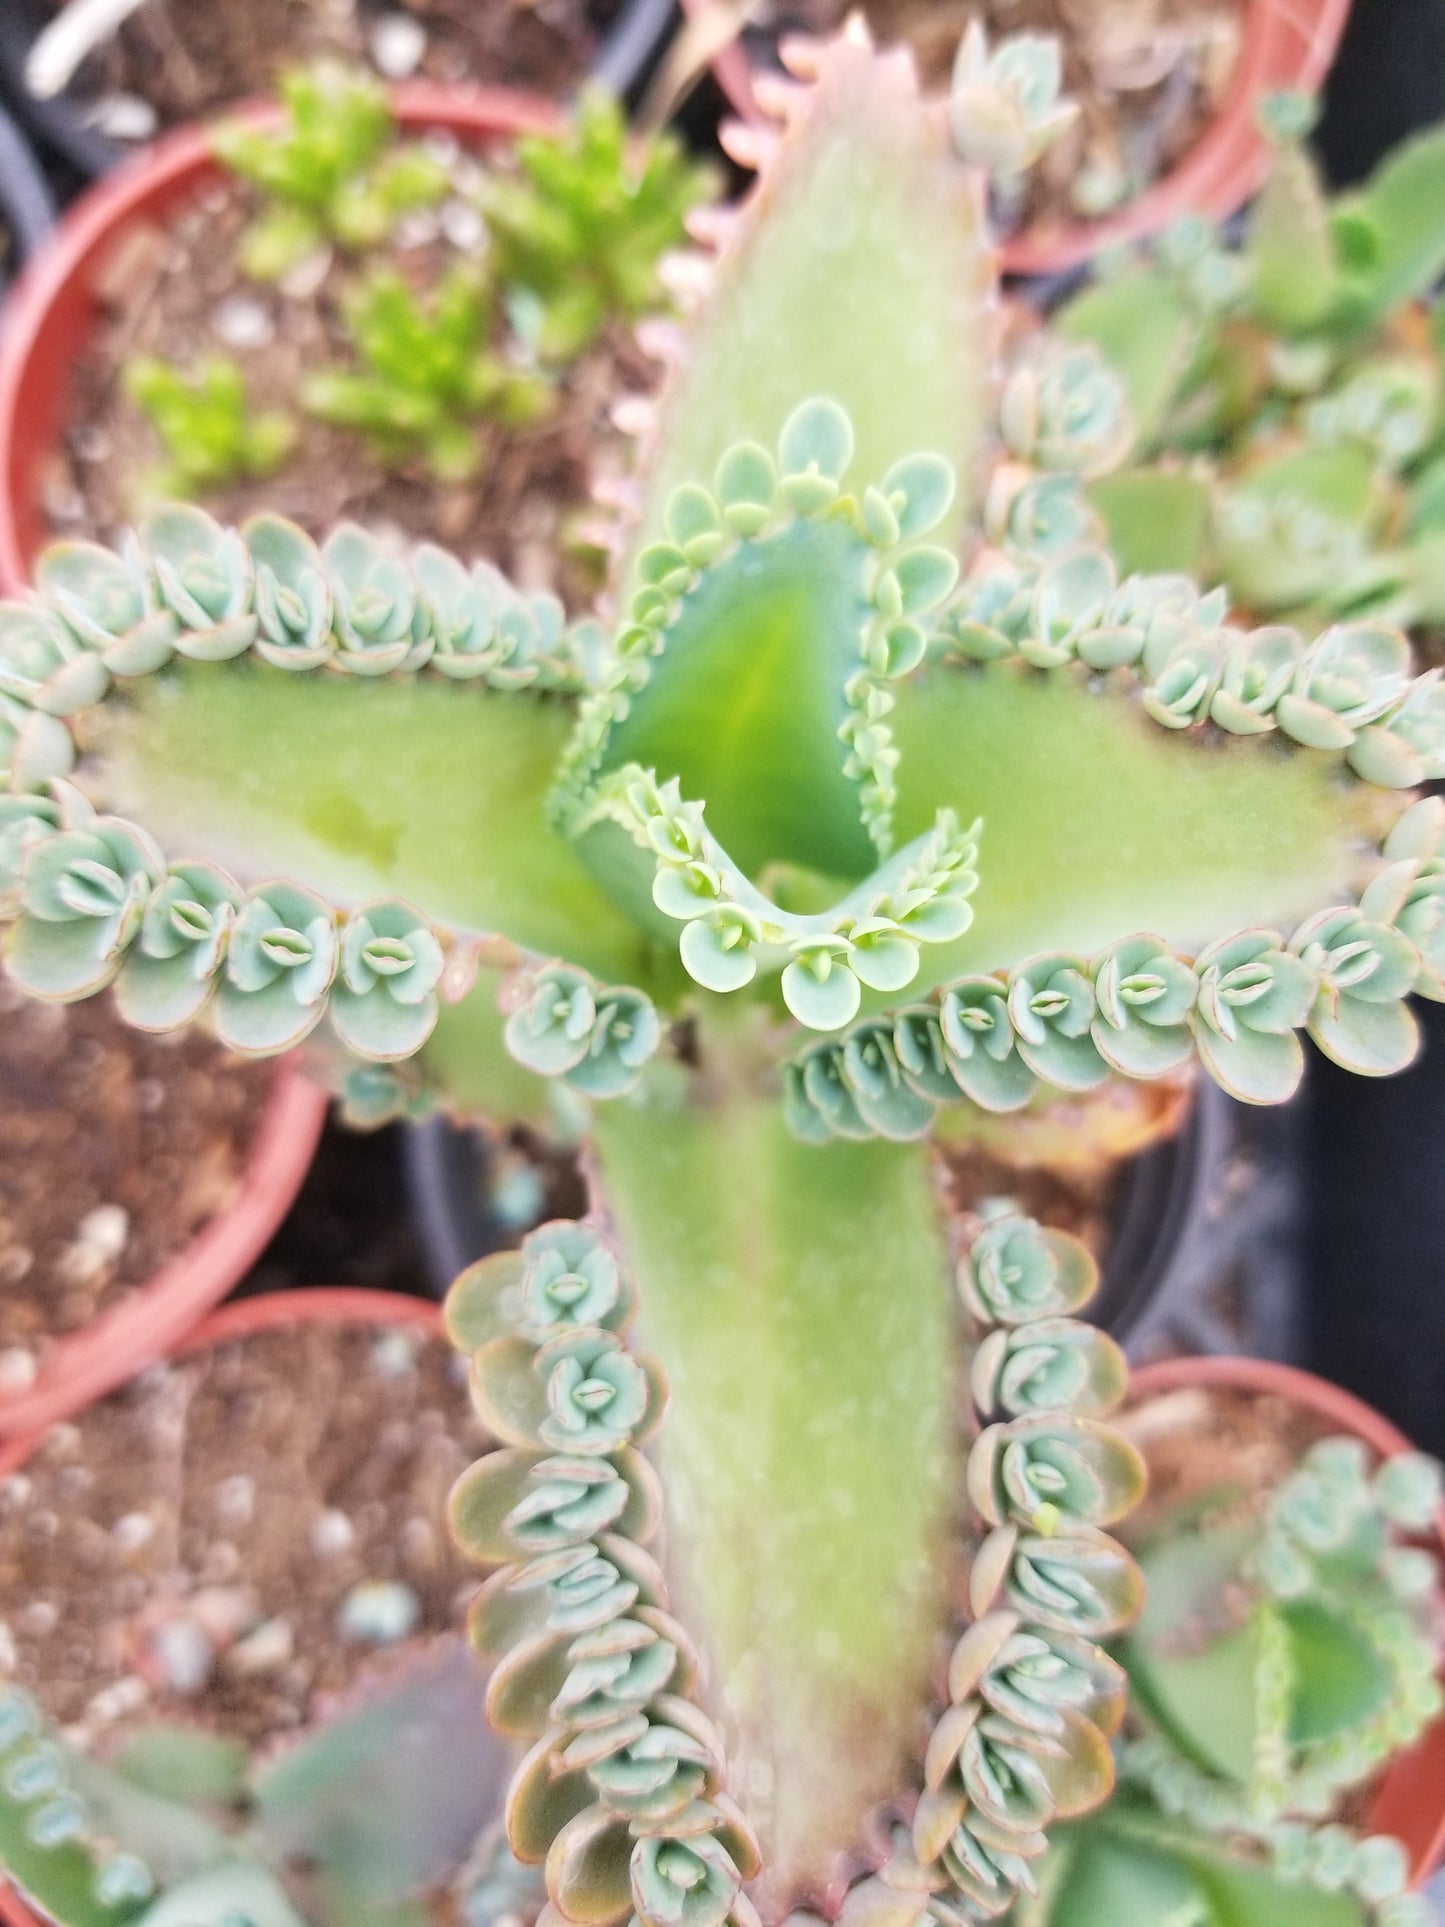 Kalanchoe Deigremontiana "Mexican Sombrero" (4" Pot) "babies are included"